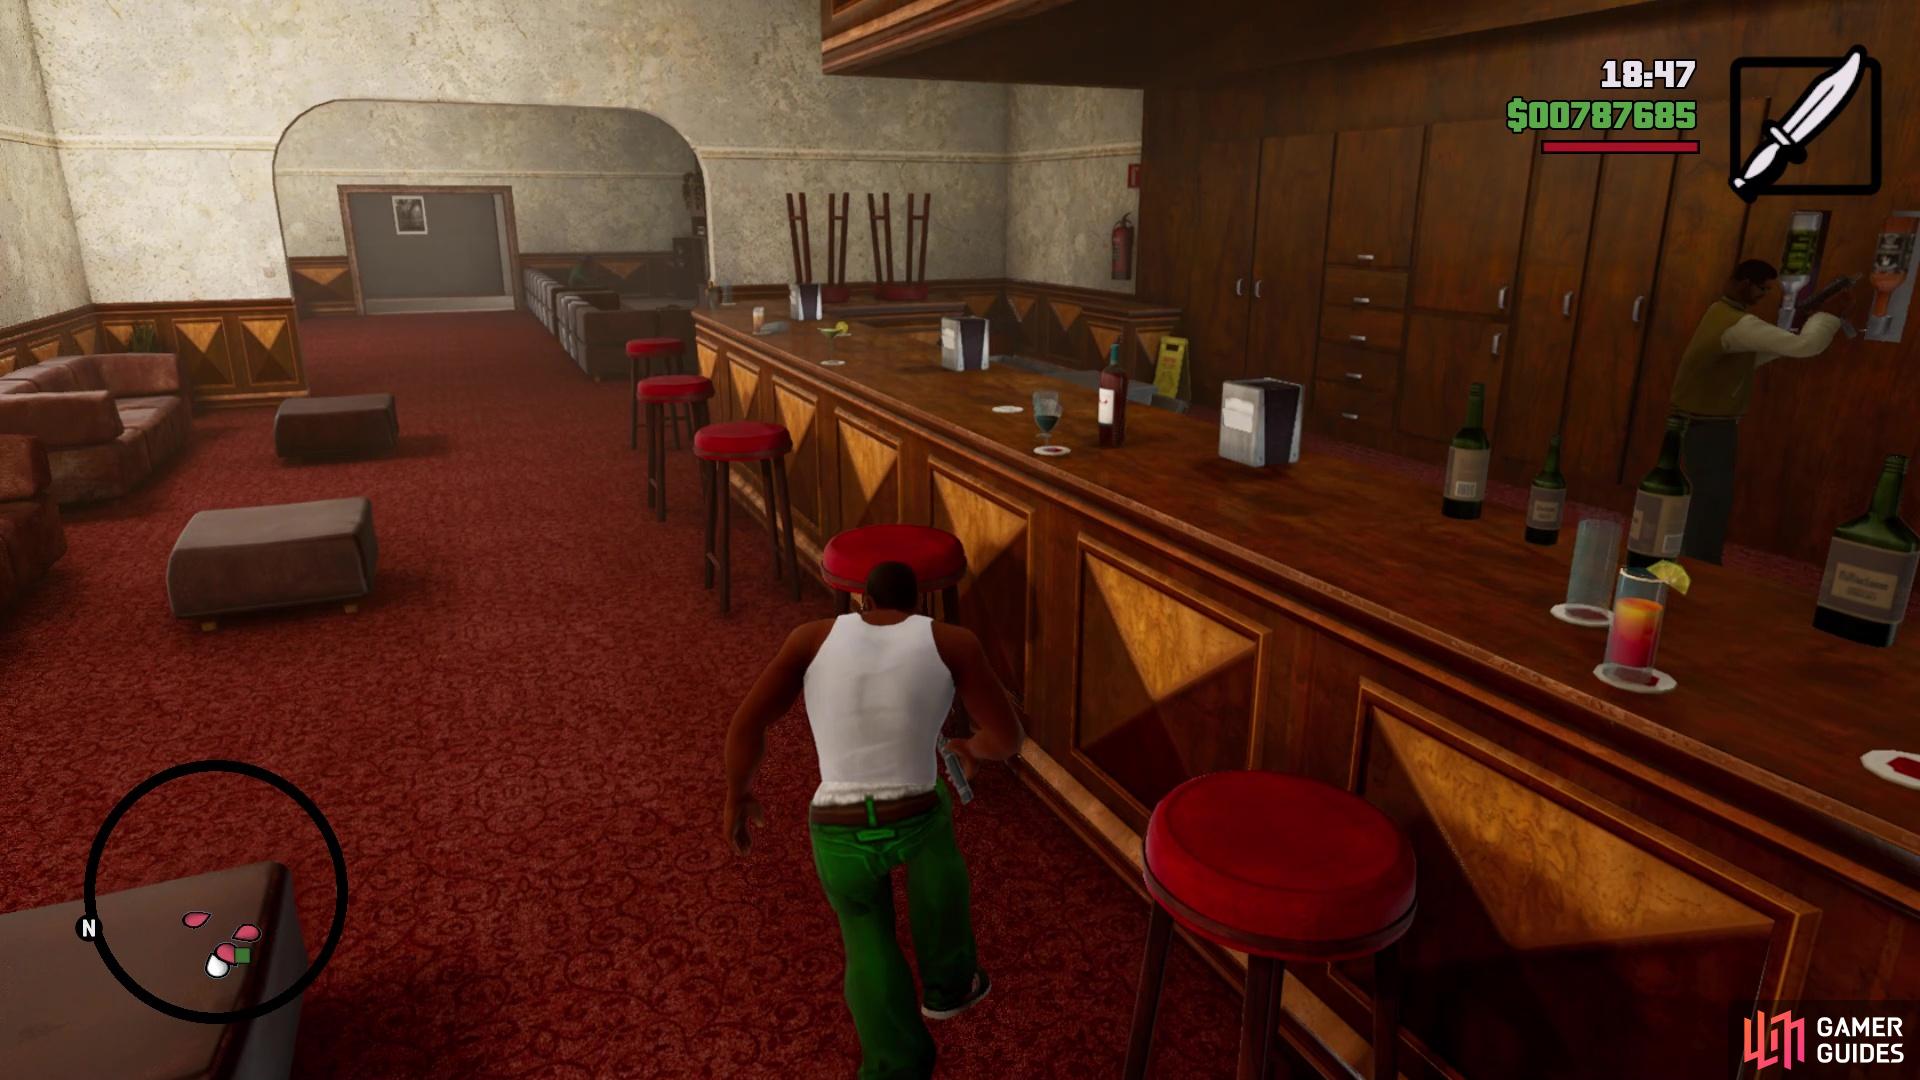 Its better to just sneak past the enemies in the bar area